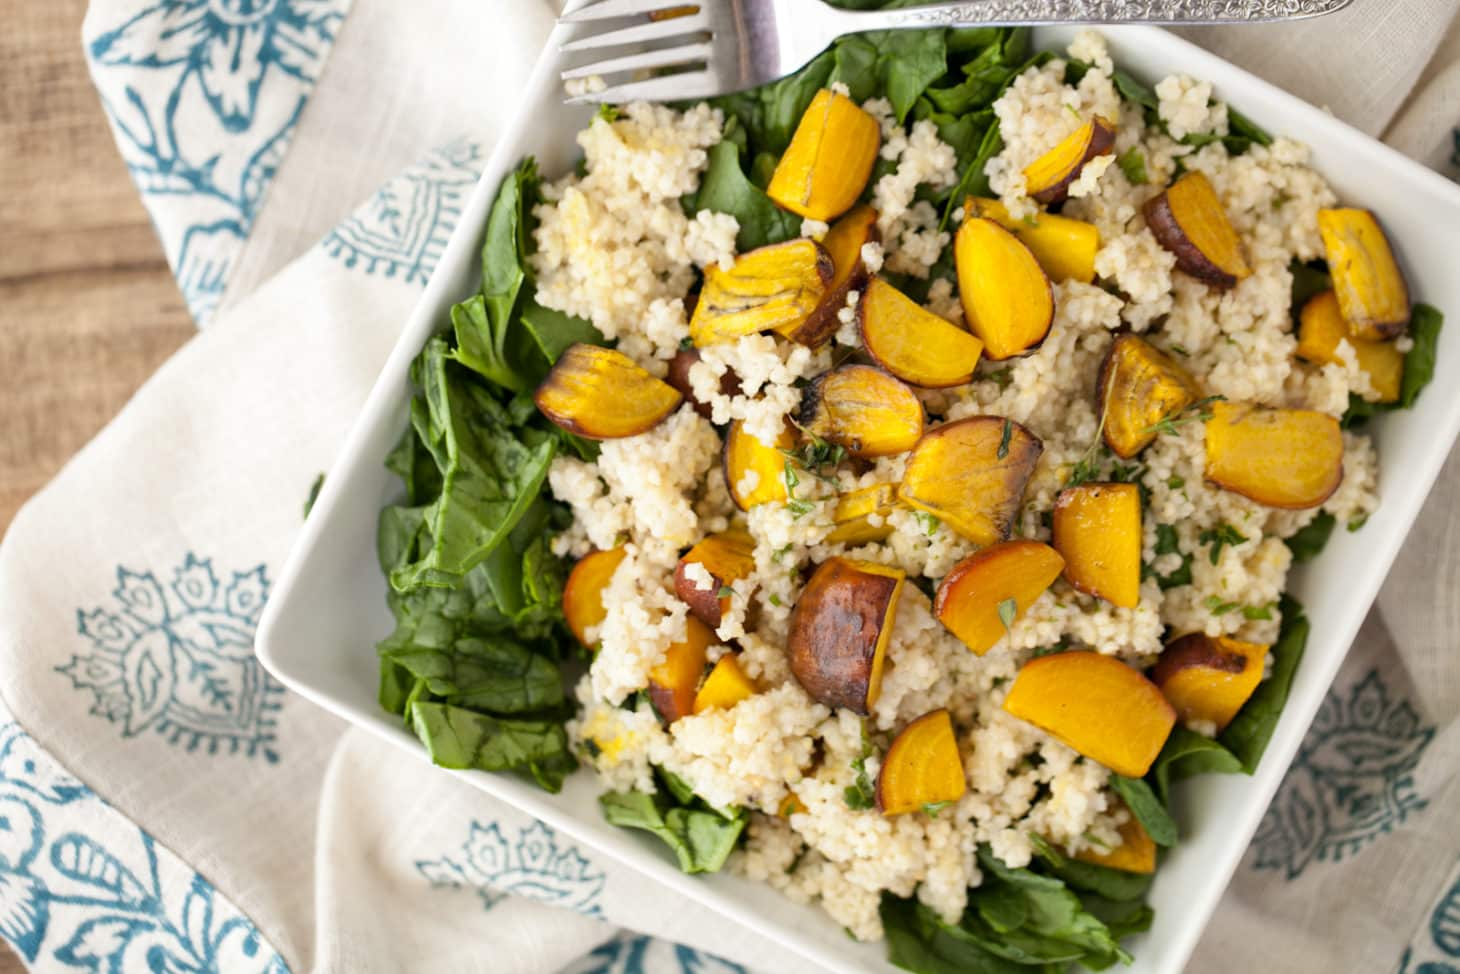 Roasted Golden Beet and Millet Spinach Salad with Herb Dressing